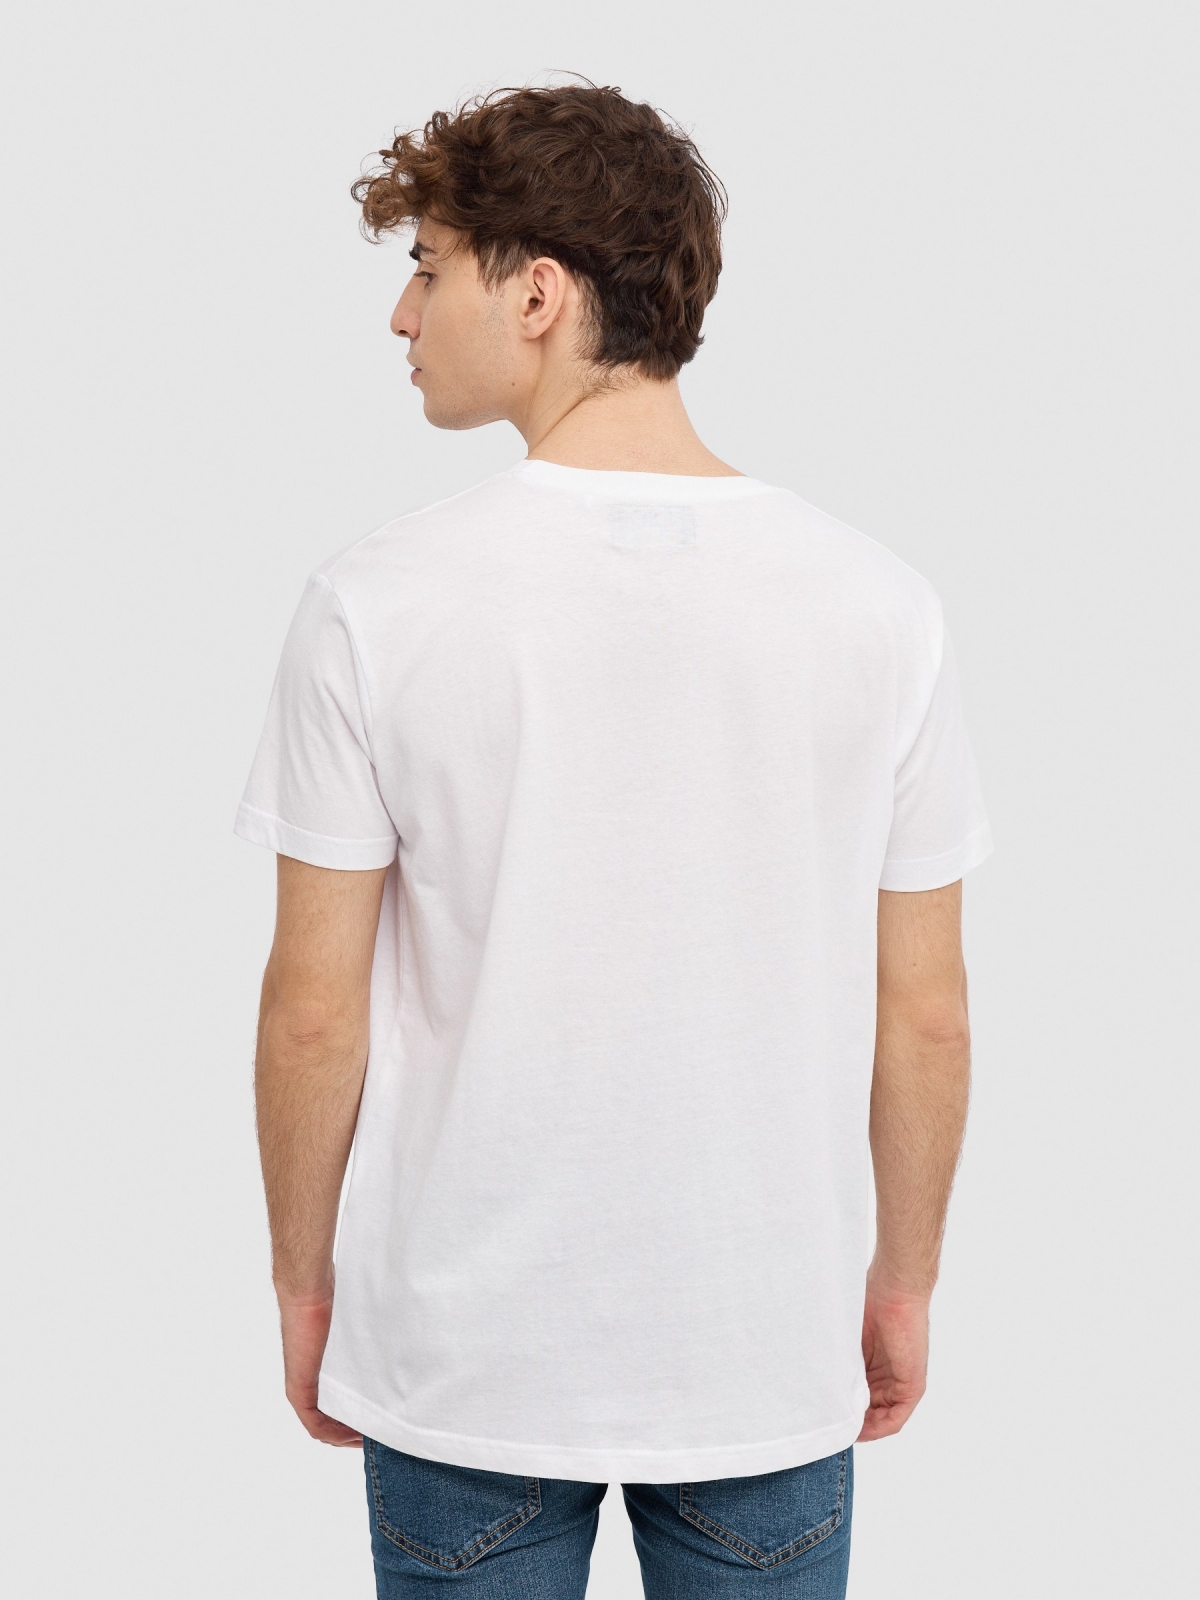 Dimensions T-shirt white middle back view